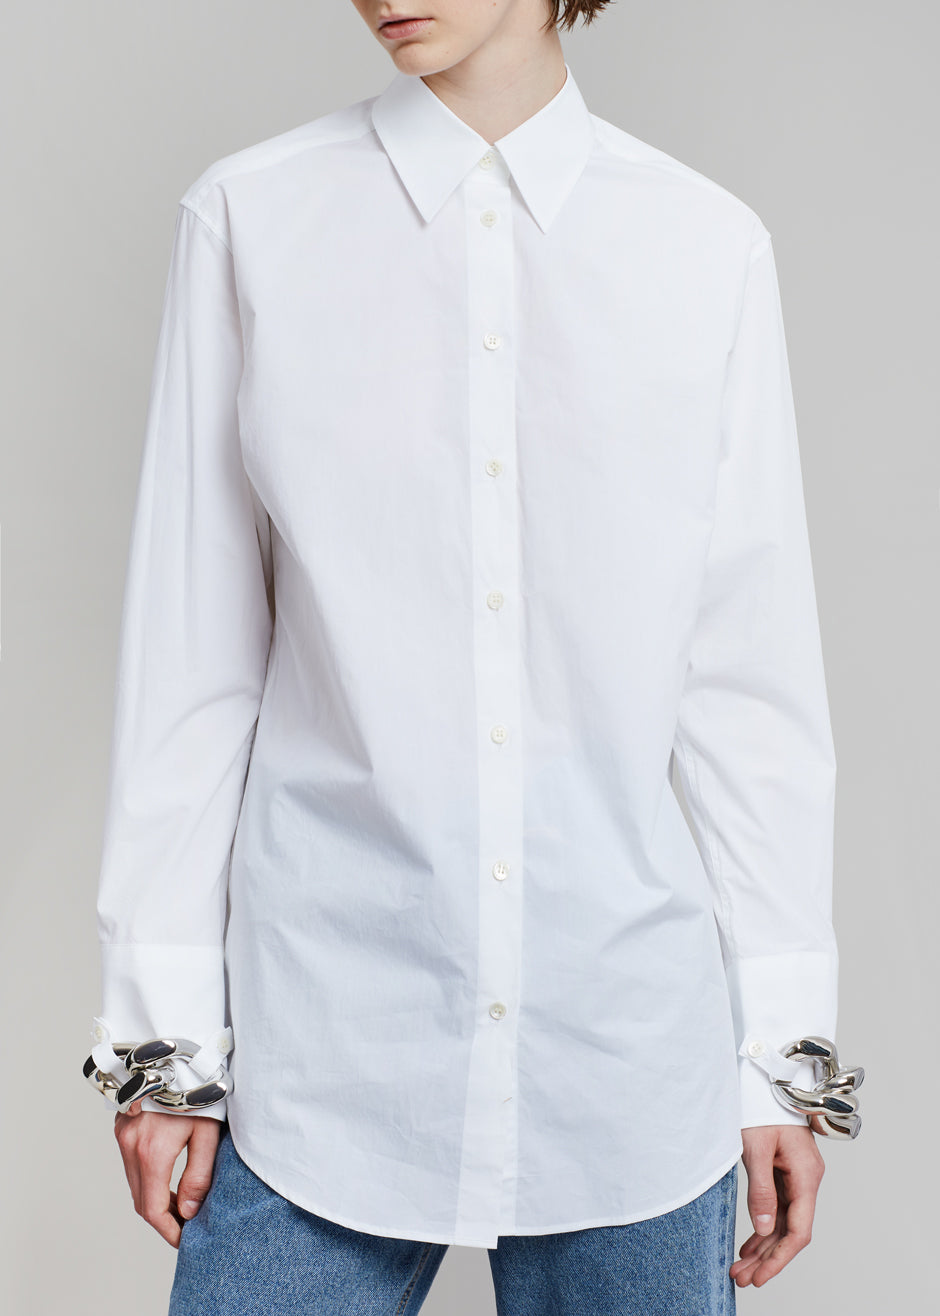 JW Anderson Silver Chain Link Shirt - White - 3